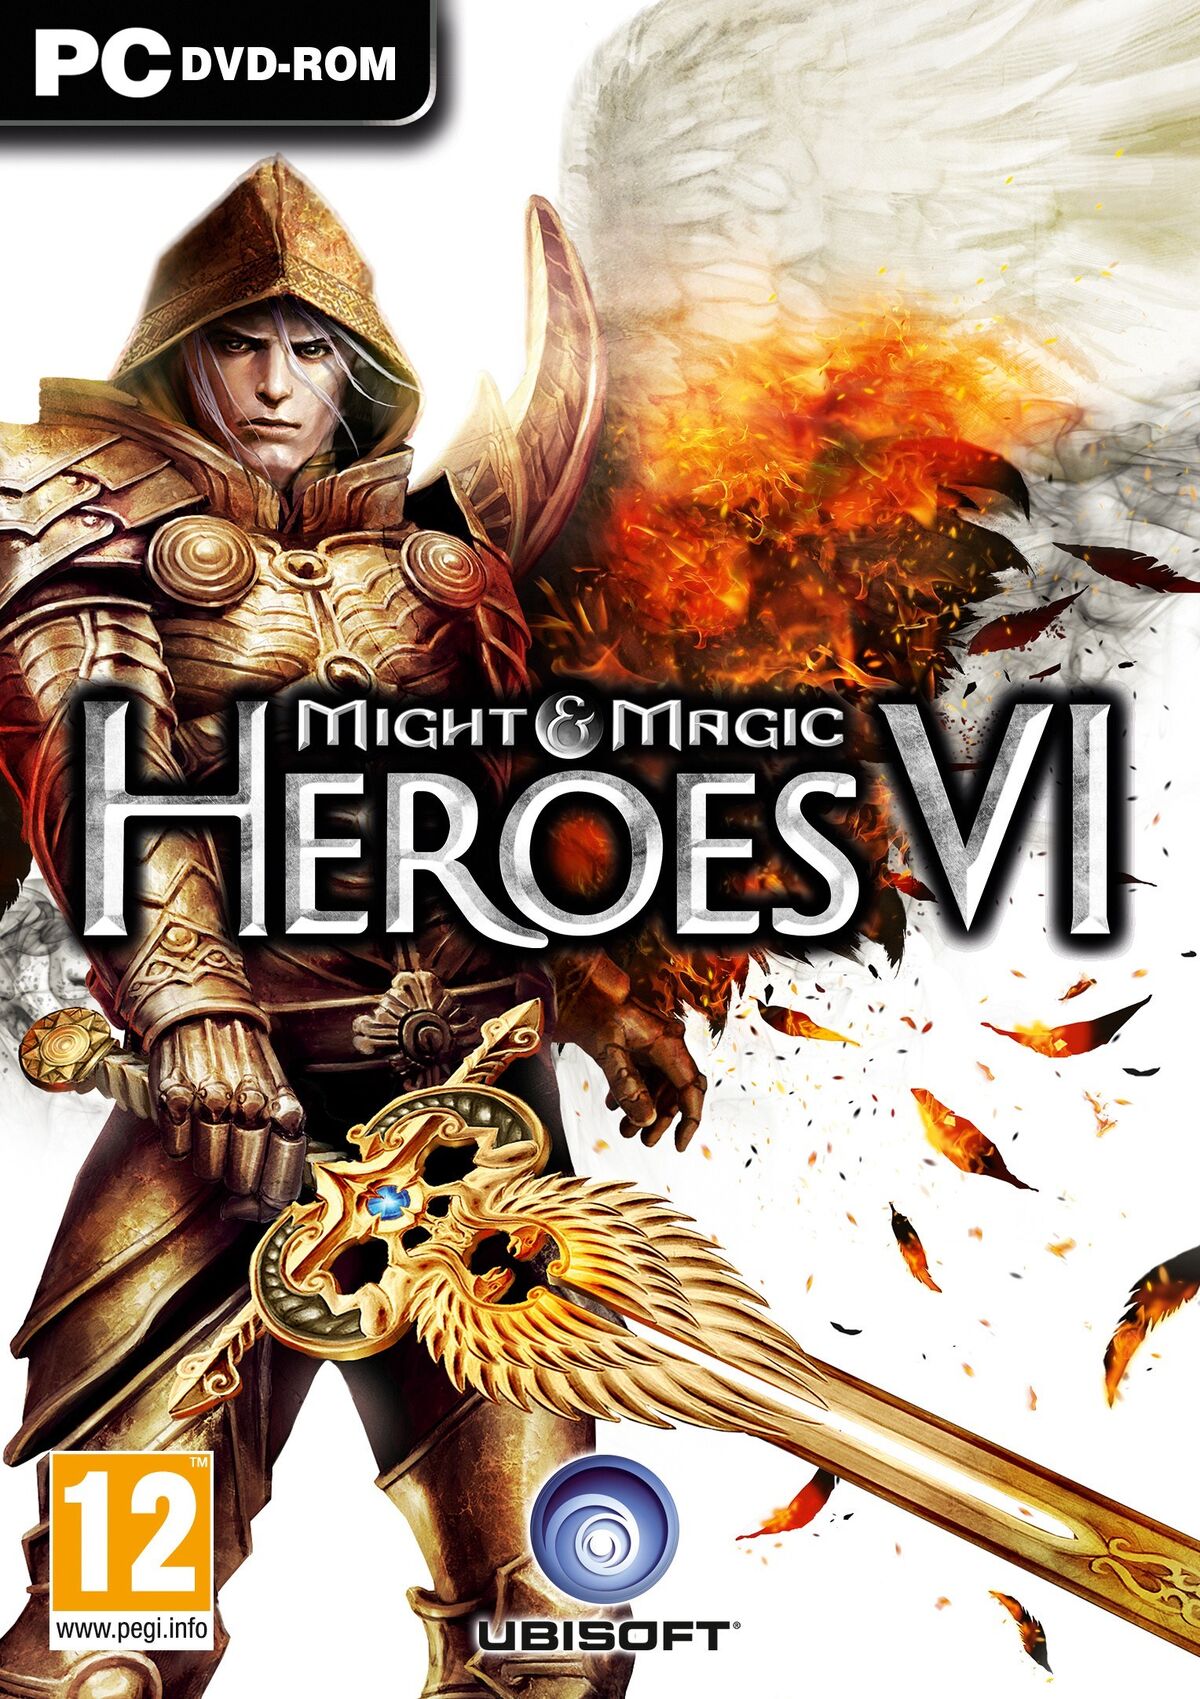 Might & Magic Power Pack (VI, VII, VIII, IX, Clash of Heroes, Mandate of  Heaven, Shades of Darkness) [Online Game Codes] 